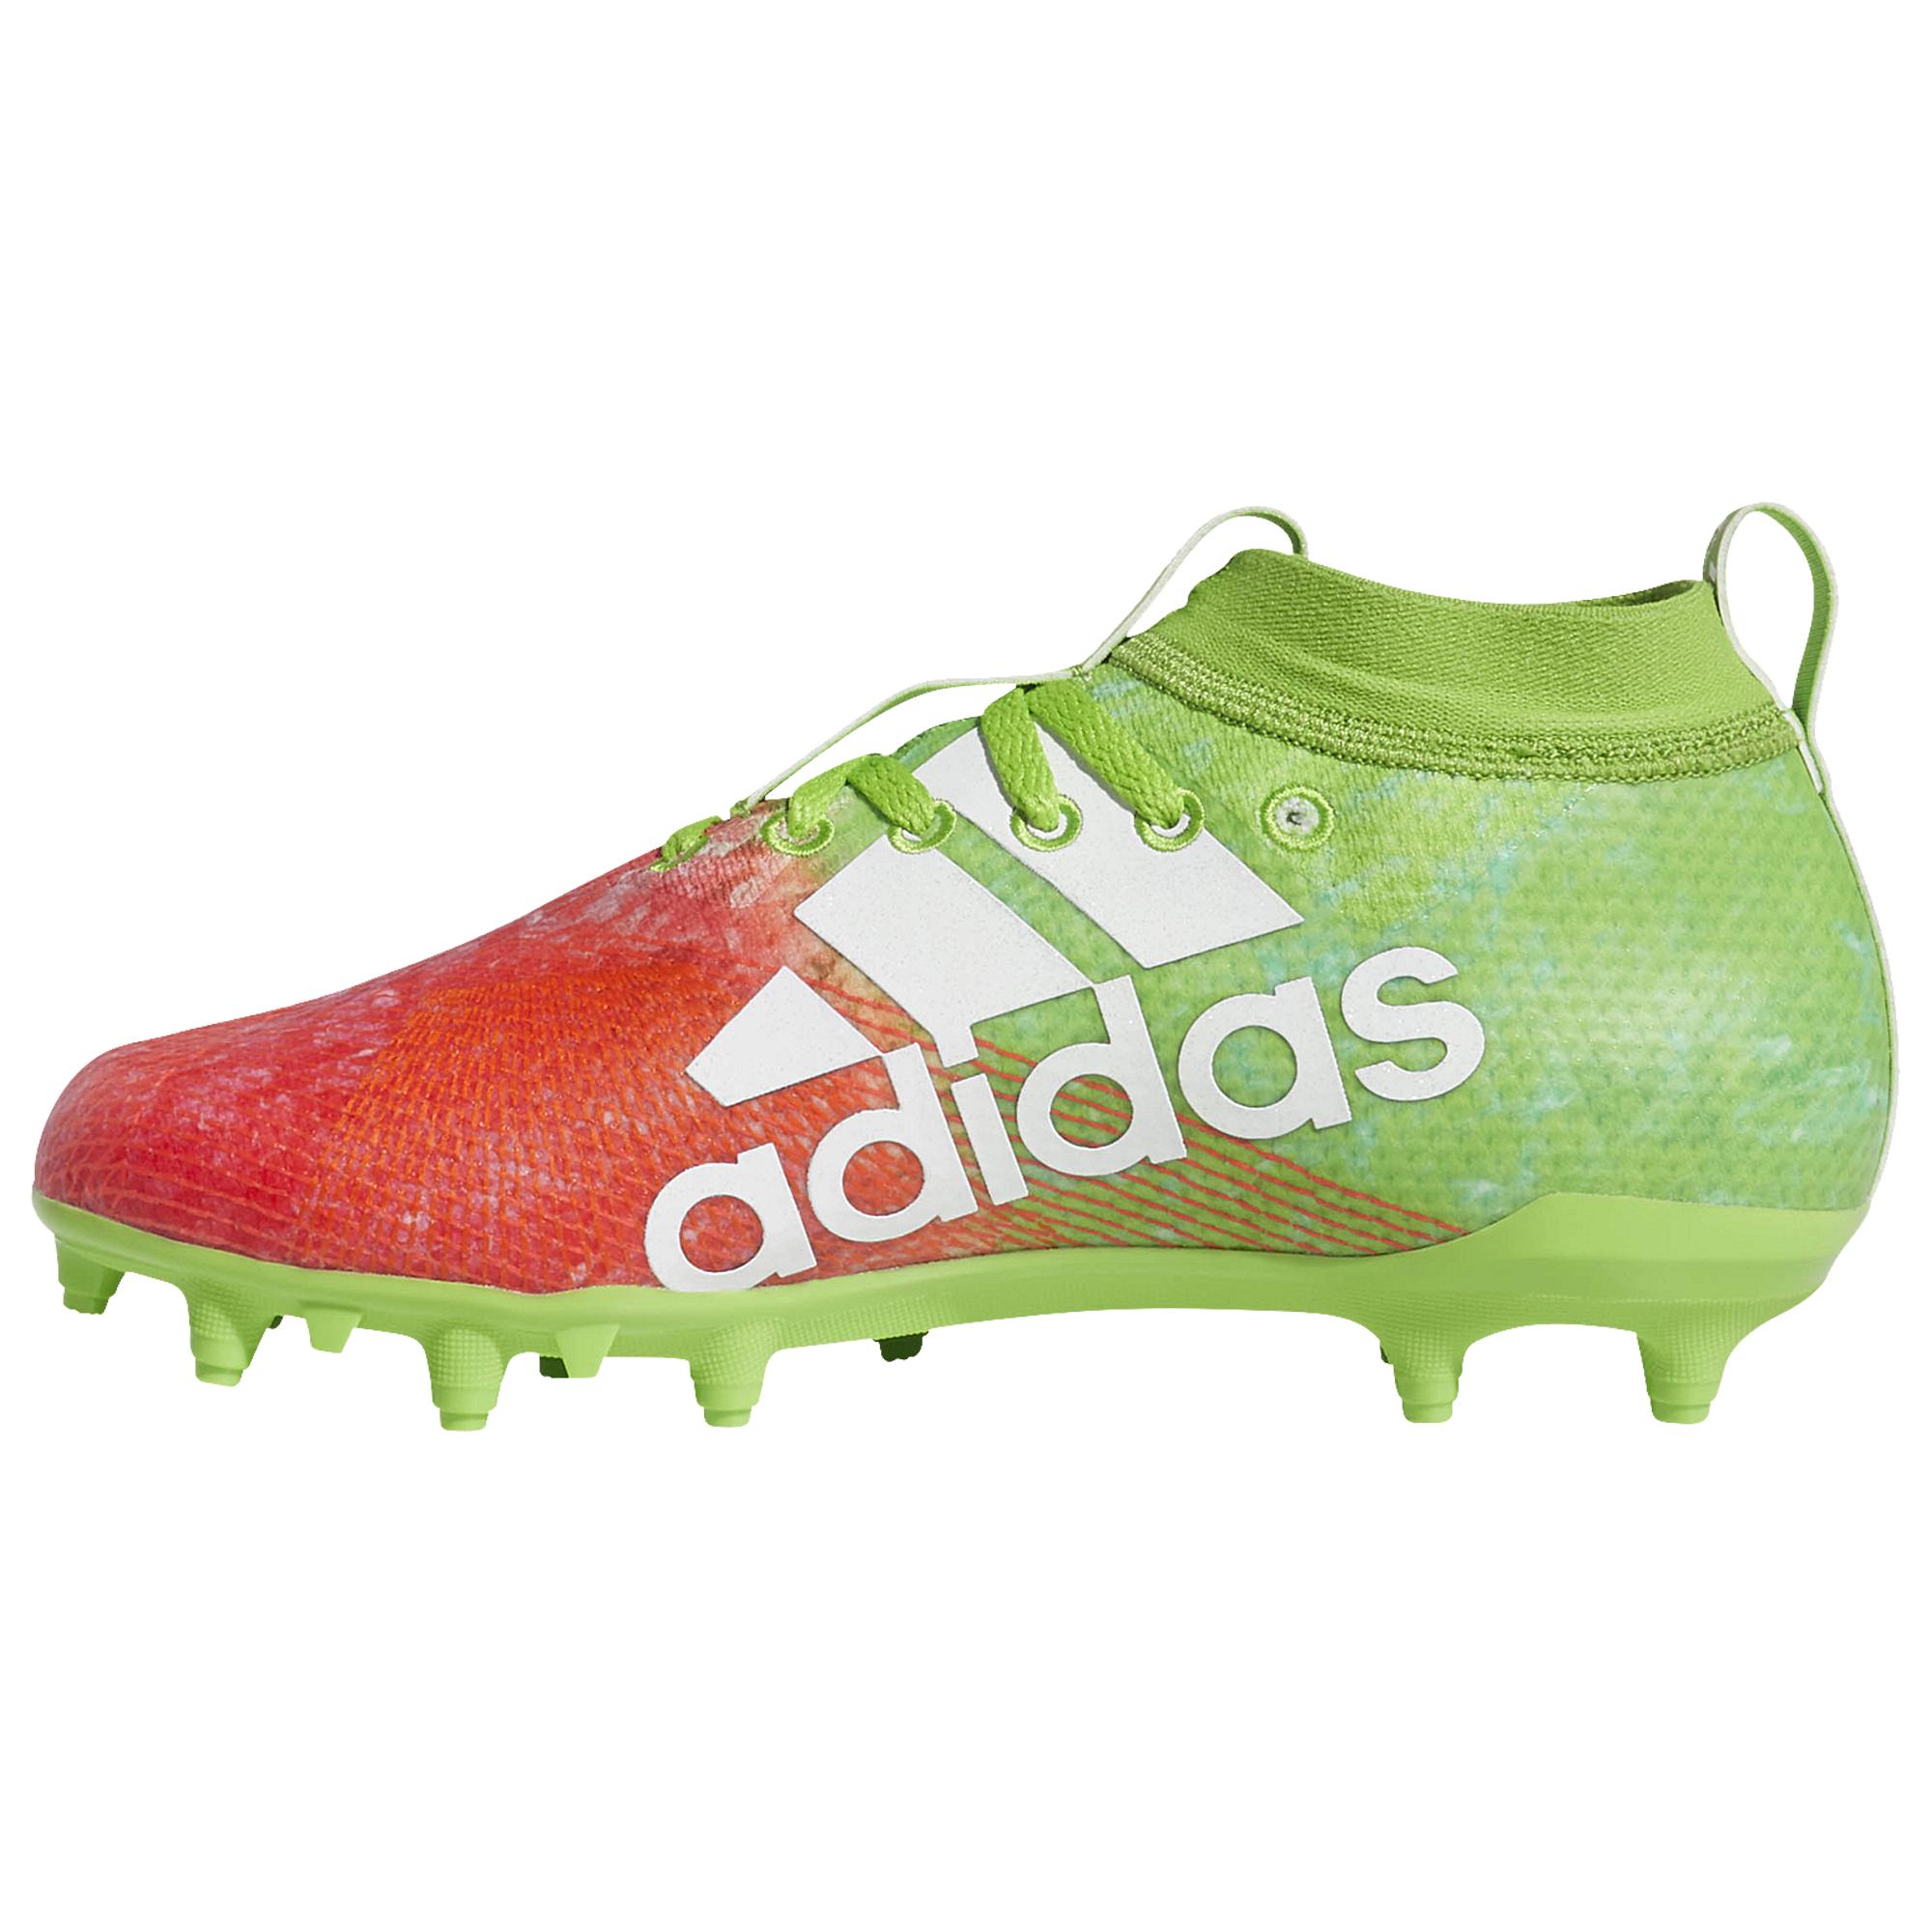 snow cone cleats